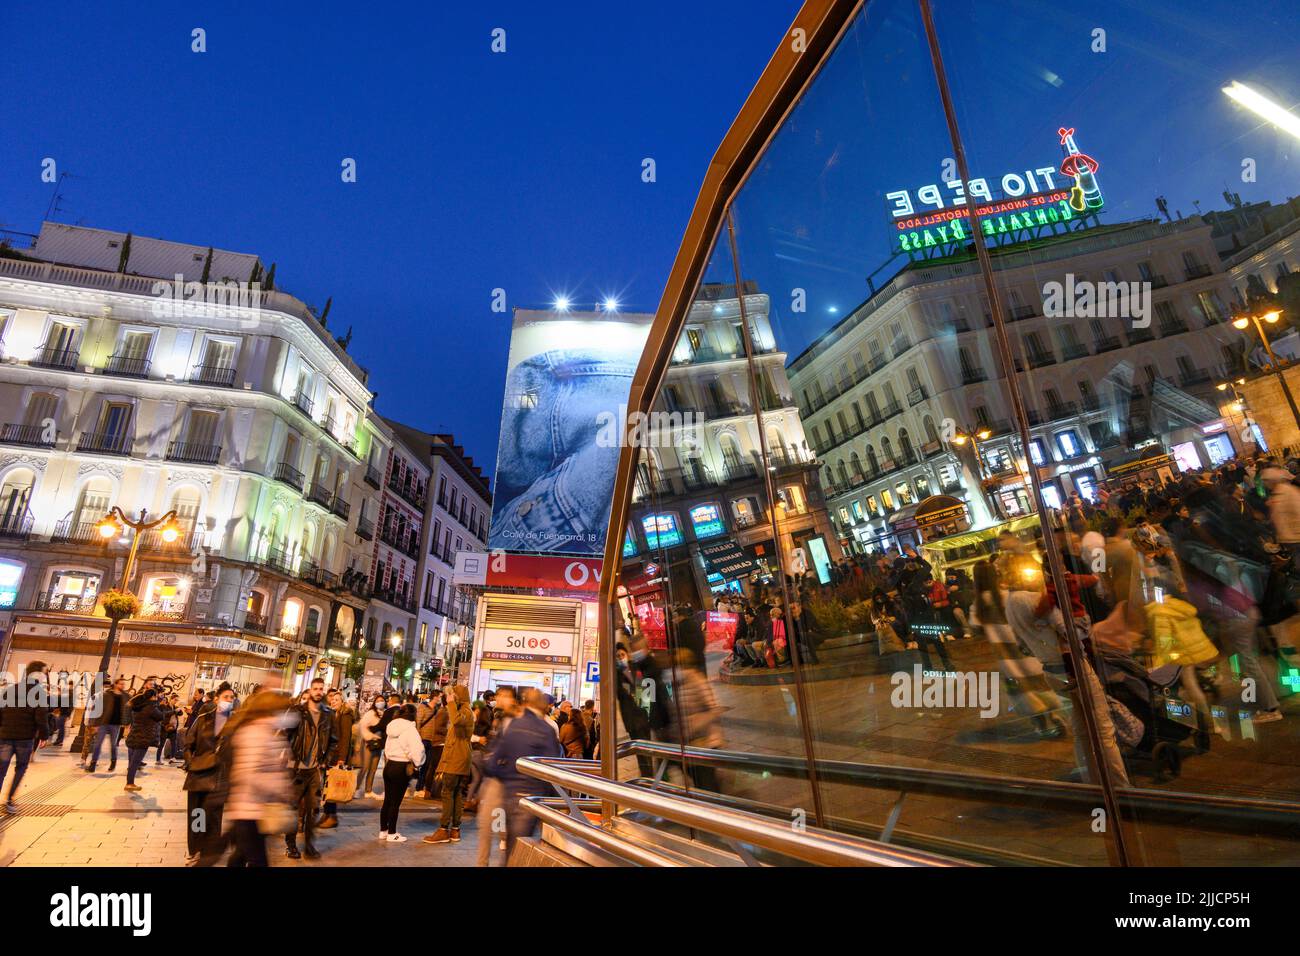 Crowds in The Puerta del Sol, at night with the famous Tio Pepe advertising sign reflected in the windows of the Sol Metro station.  Madrid, Spain. Stock Photo